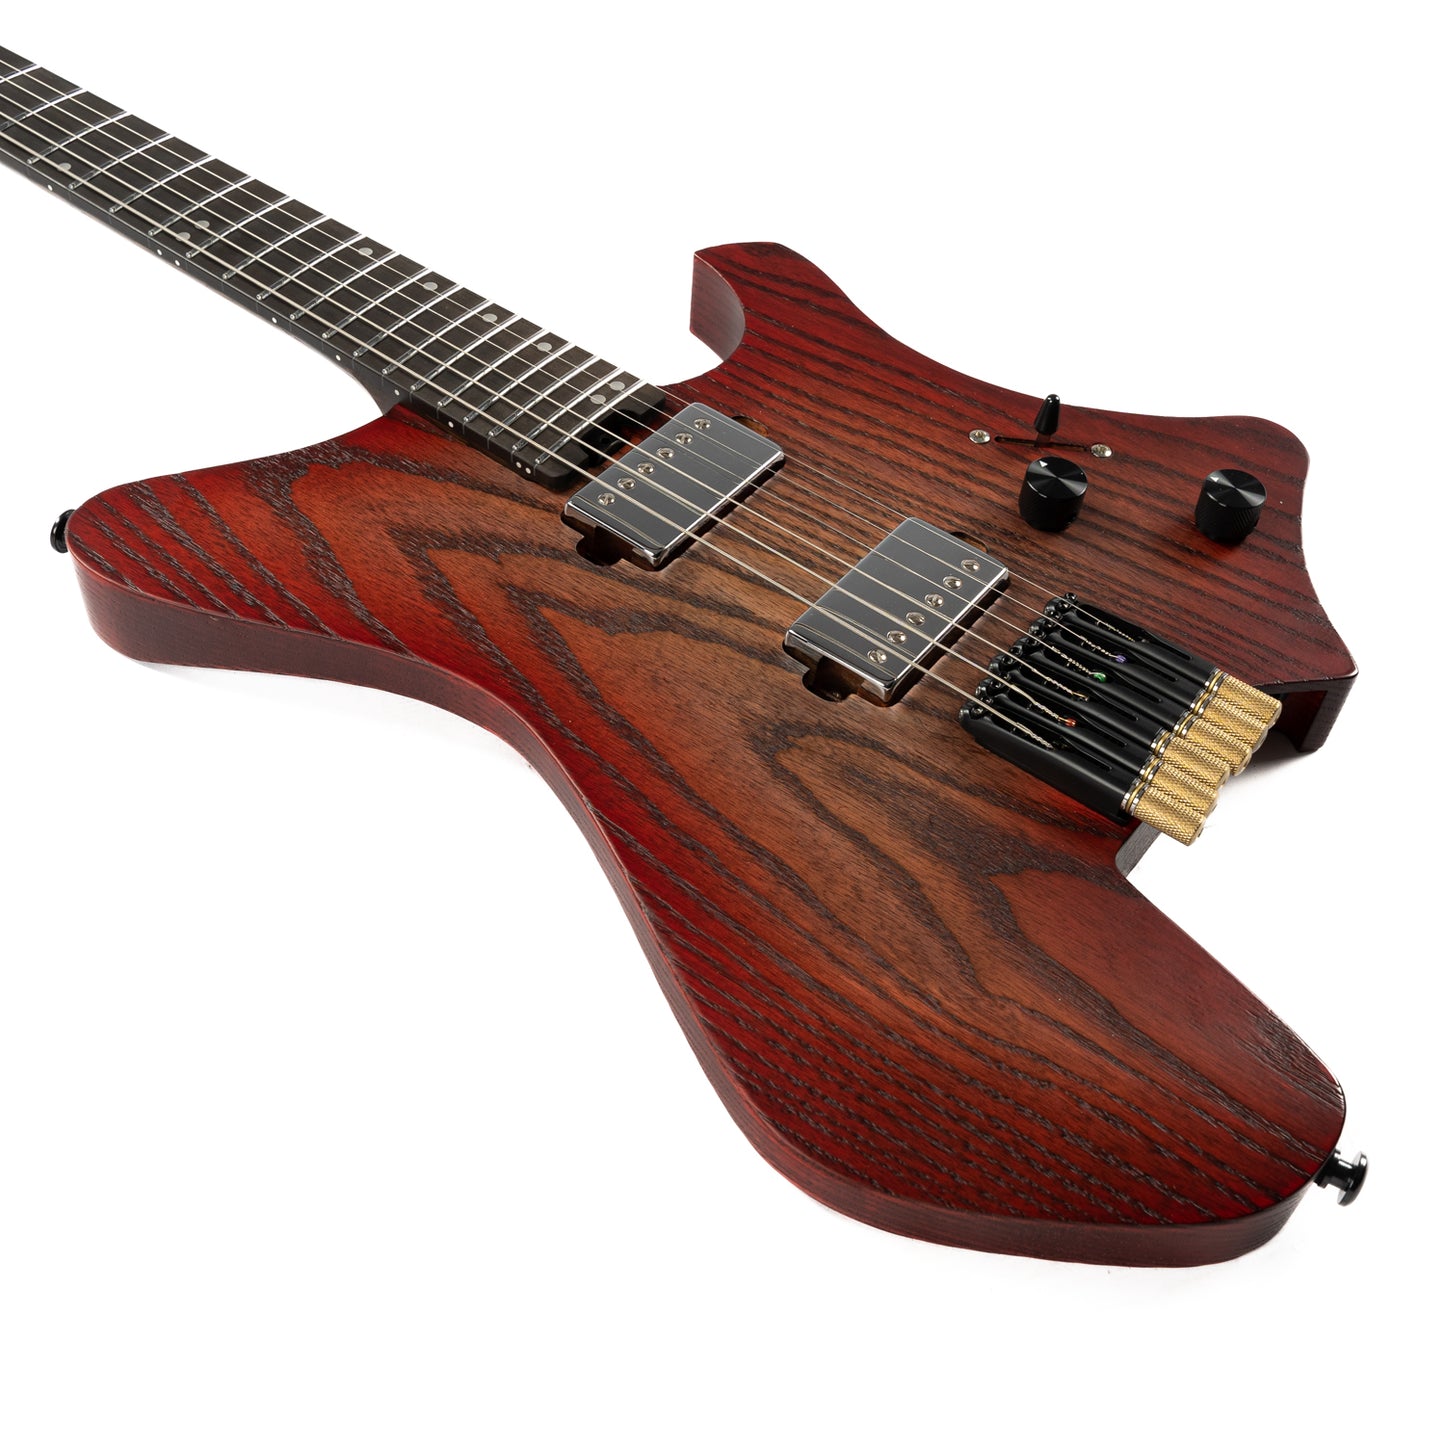 Eart Guitars, GW2-Pro, Right Handed Headless 6 String Fixed Bridge Electric Guitar, Red Burst